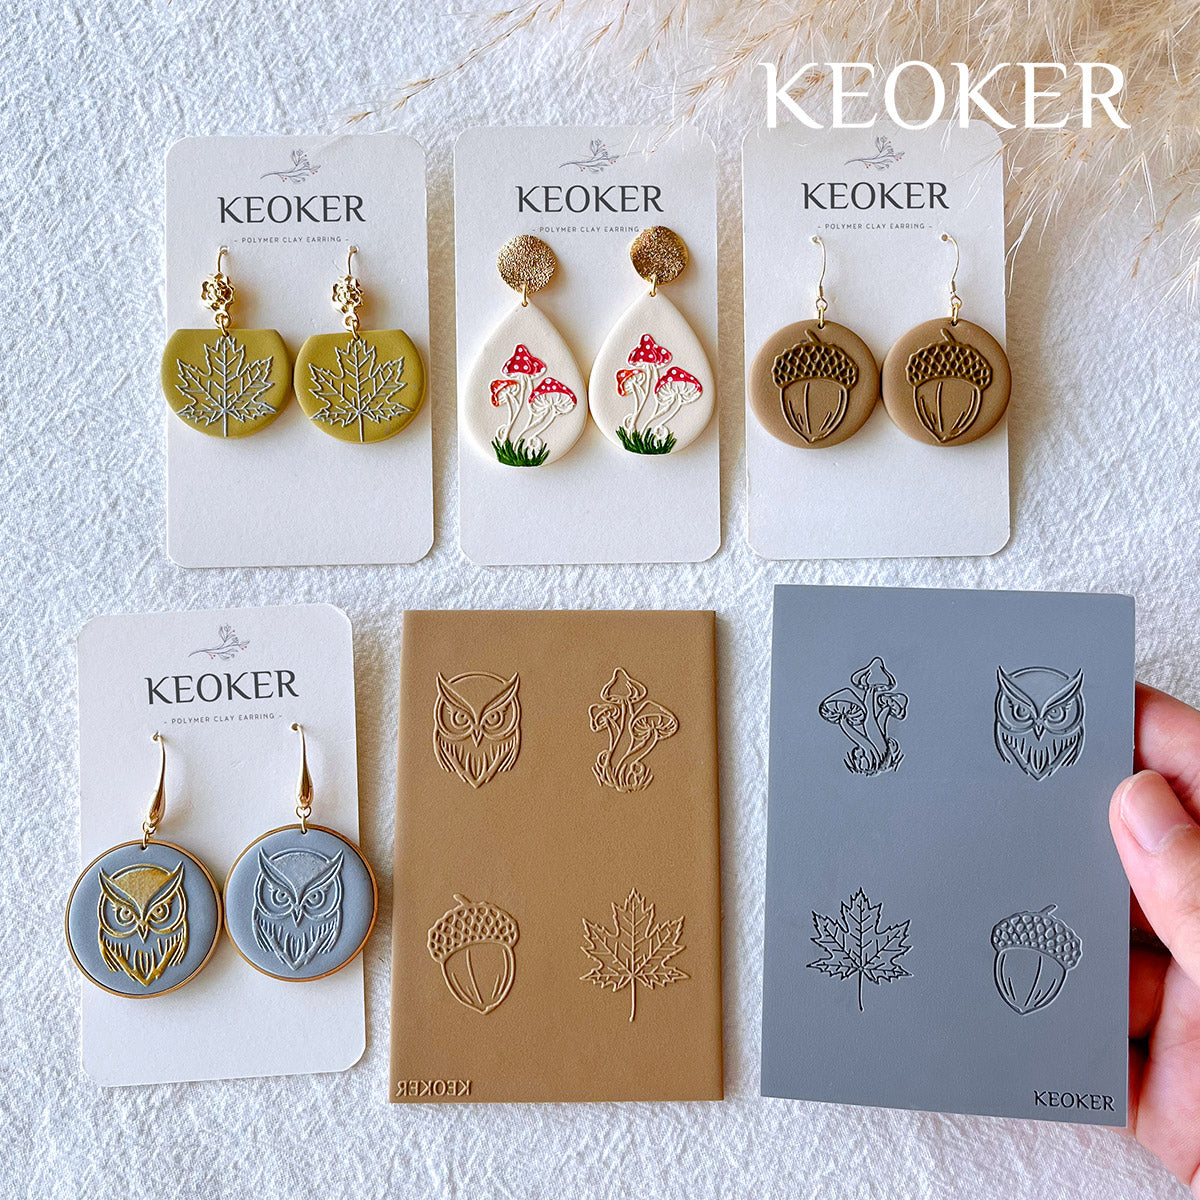  KEOKER Polymer Clay Texture Sheets Set, Clay Earring